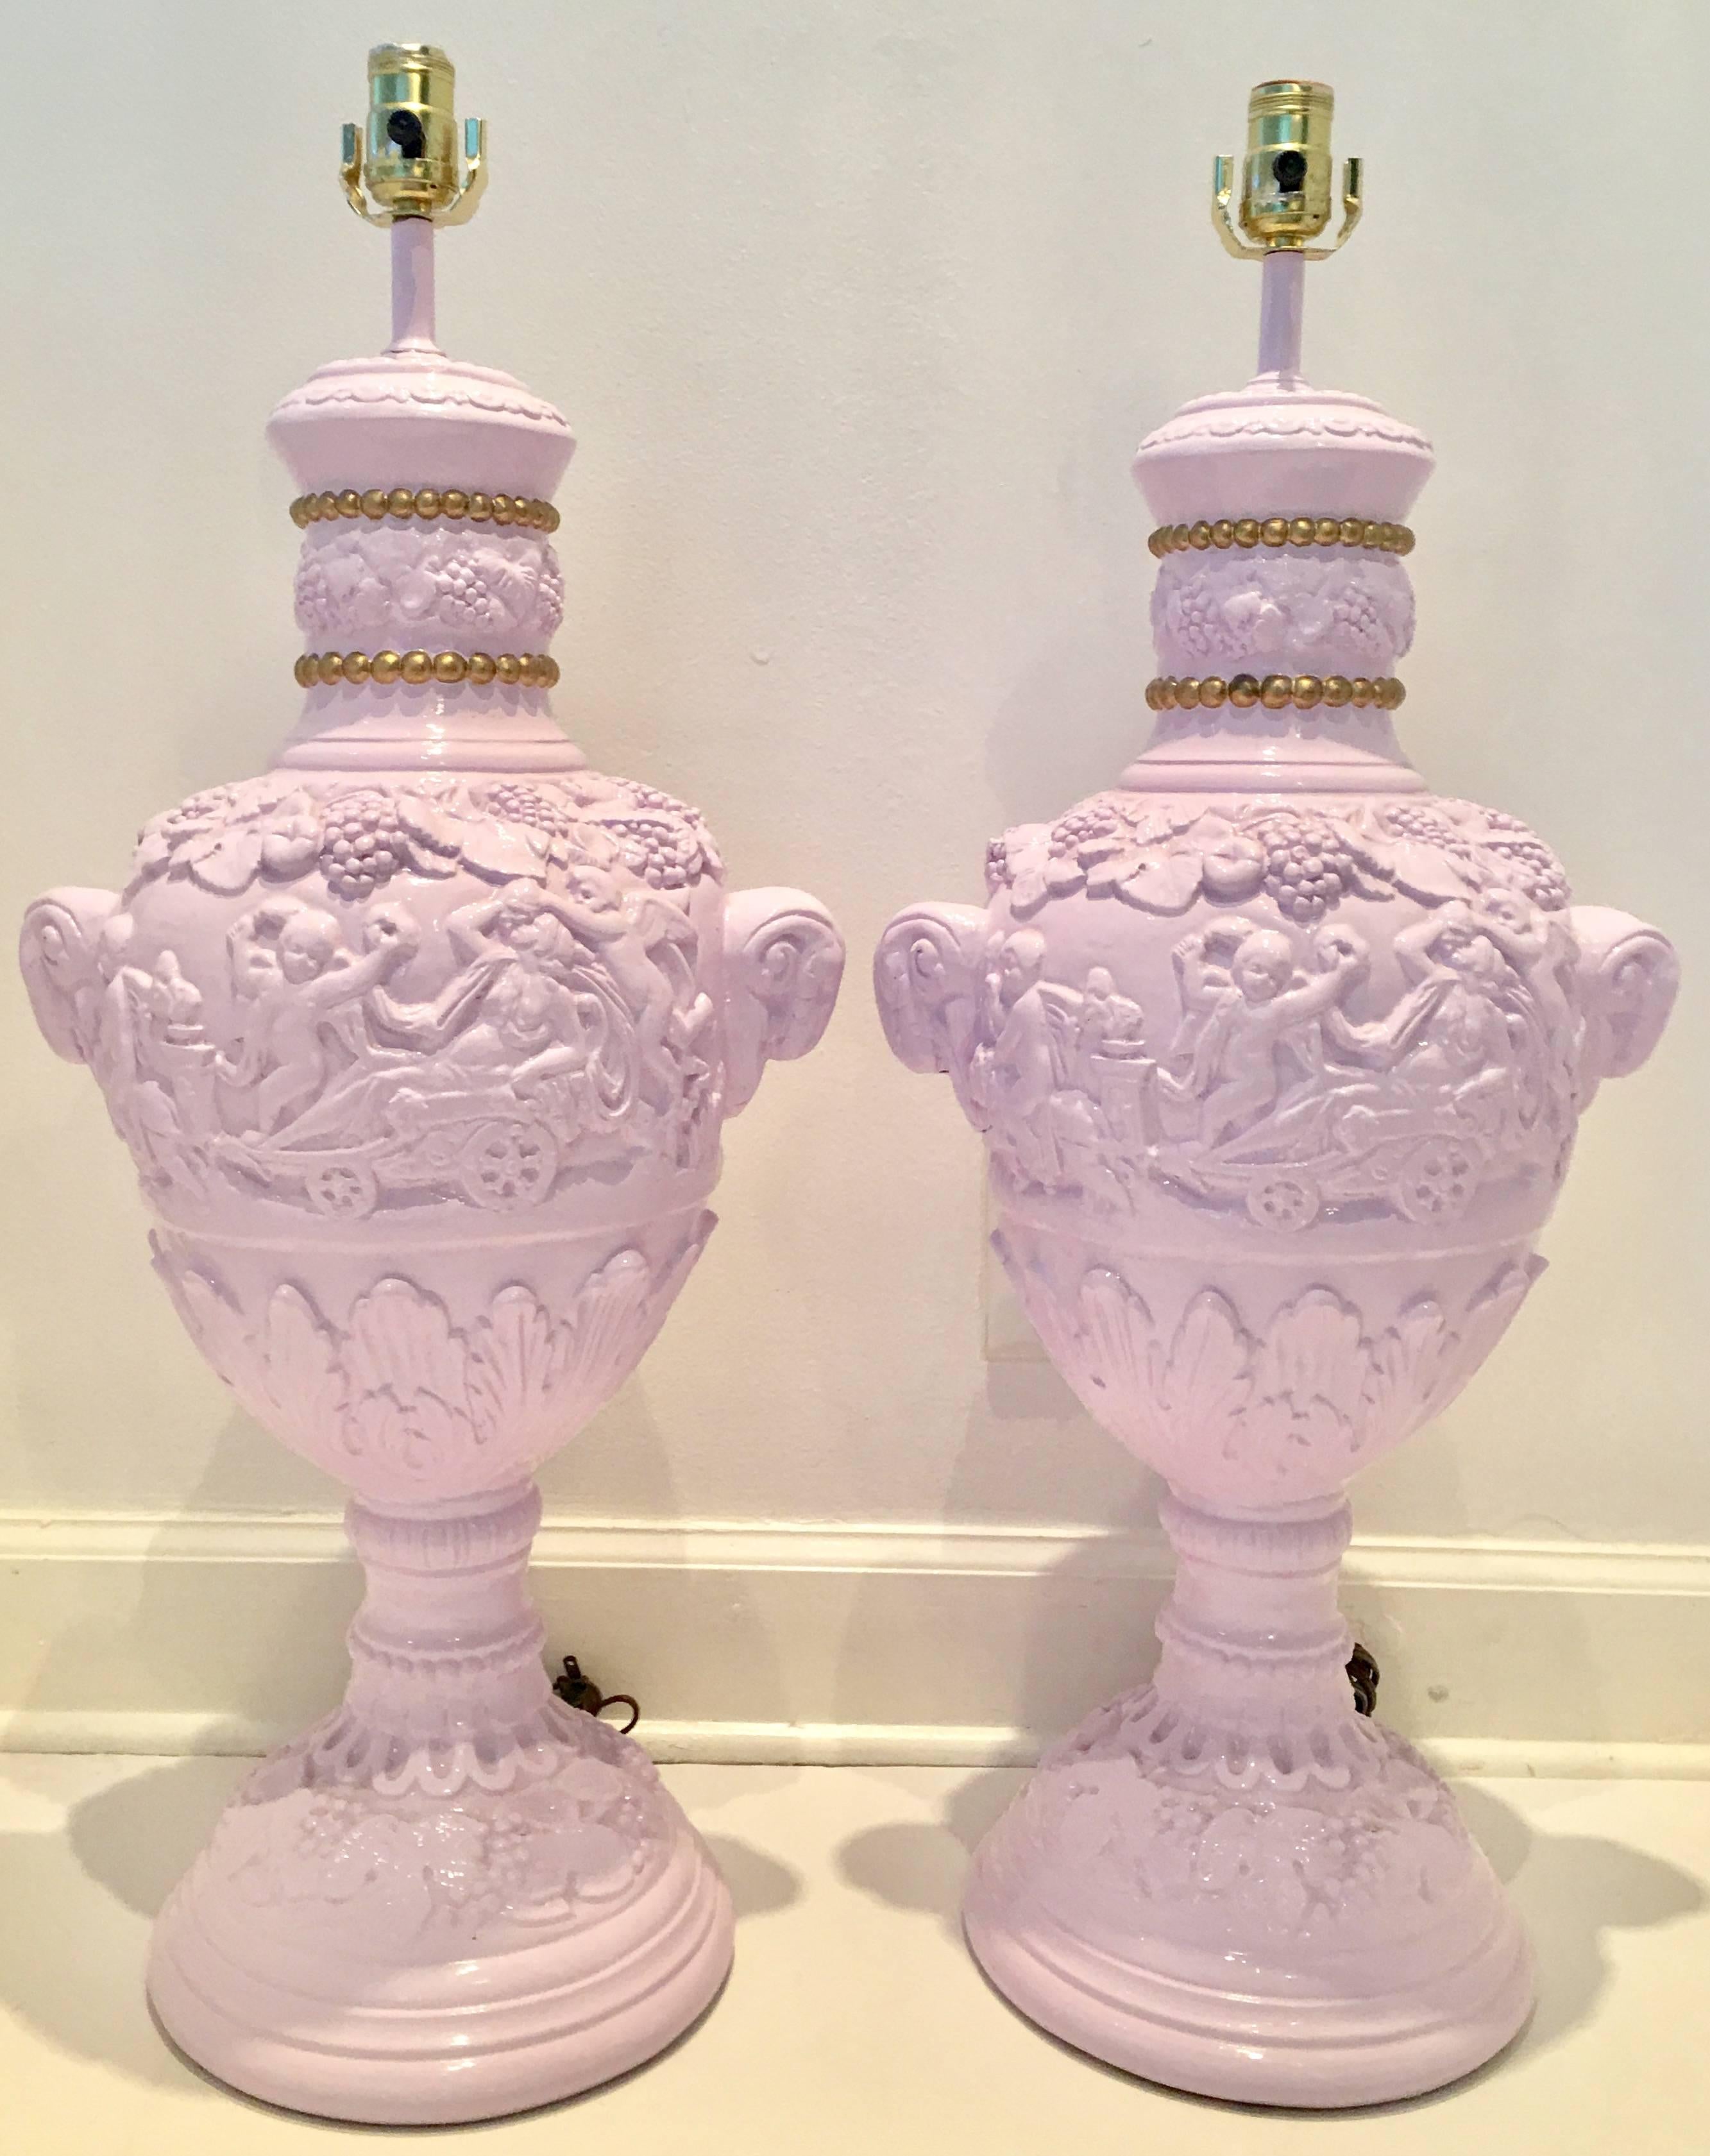 Amazing Pair of 1960s custom lacquered and hand-painted gold beaded detail chalkware lamps. Features, cherubs playing musical instruments with chariots fruit and figural ram's head s on each side of each lamp. Custom lavender high-gloss lacquer